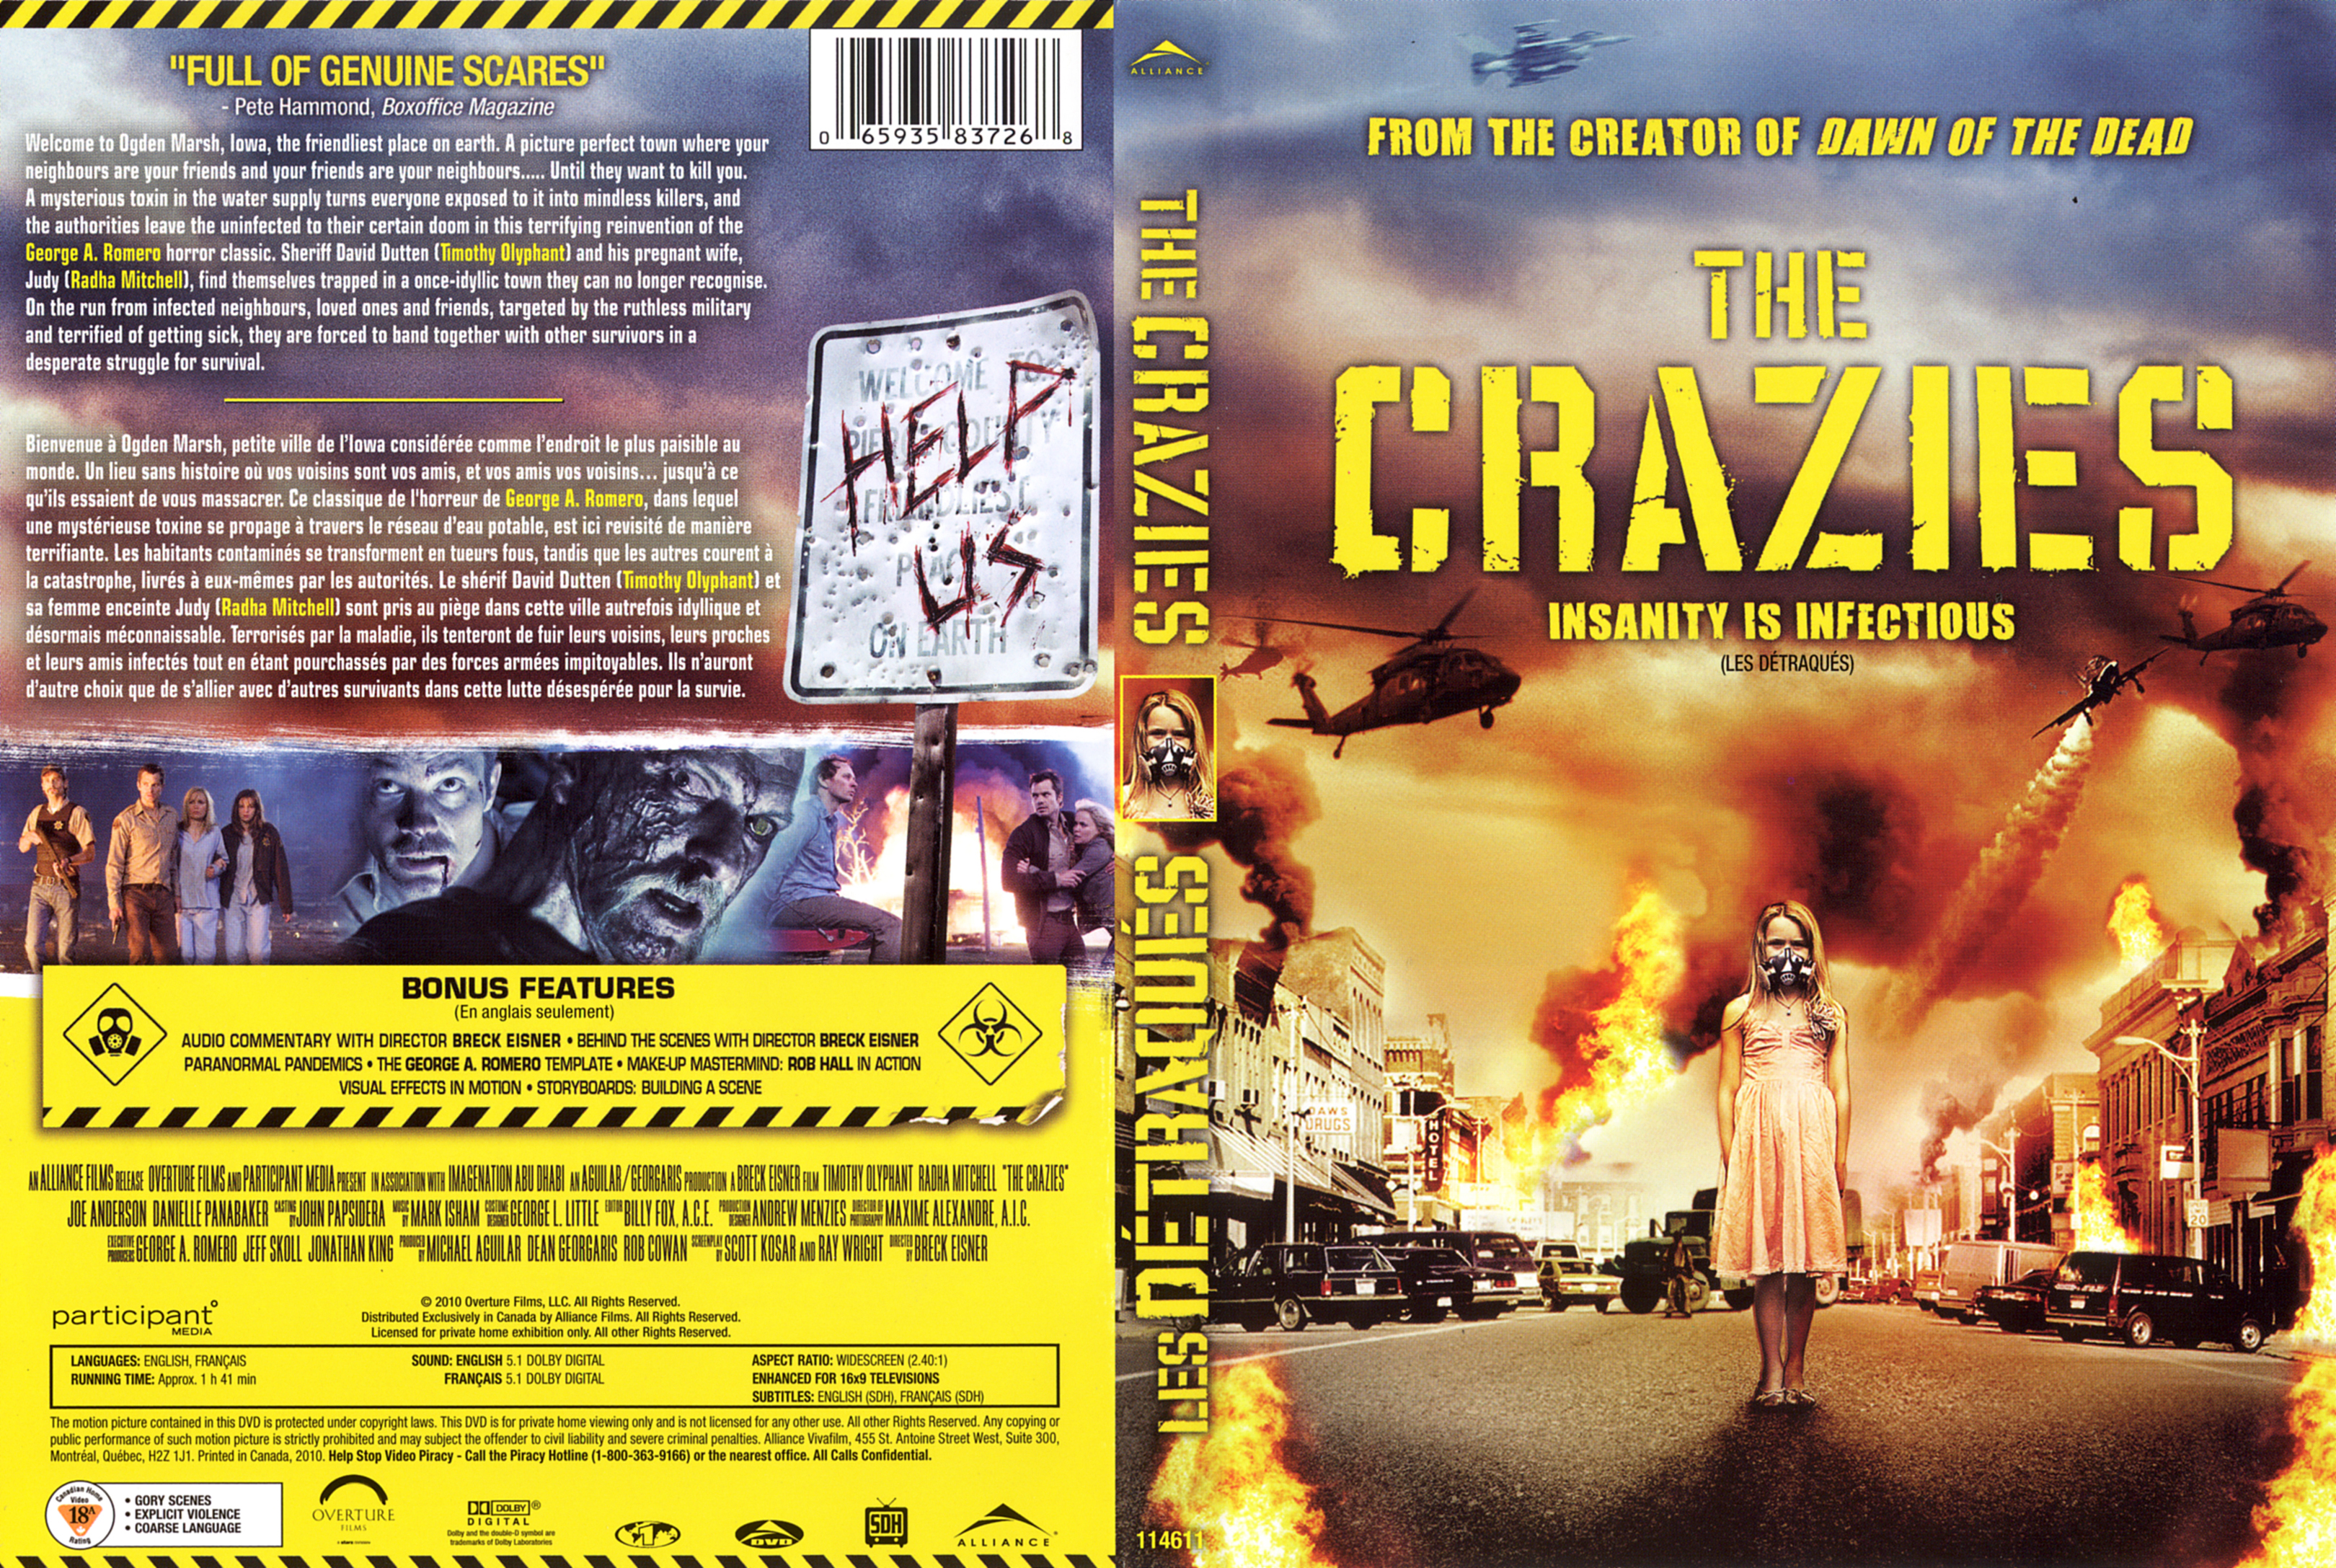 Jaquette DVD The crazies (2010) (Canadienne)